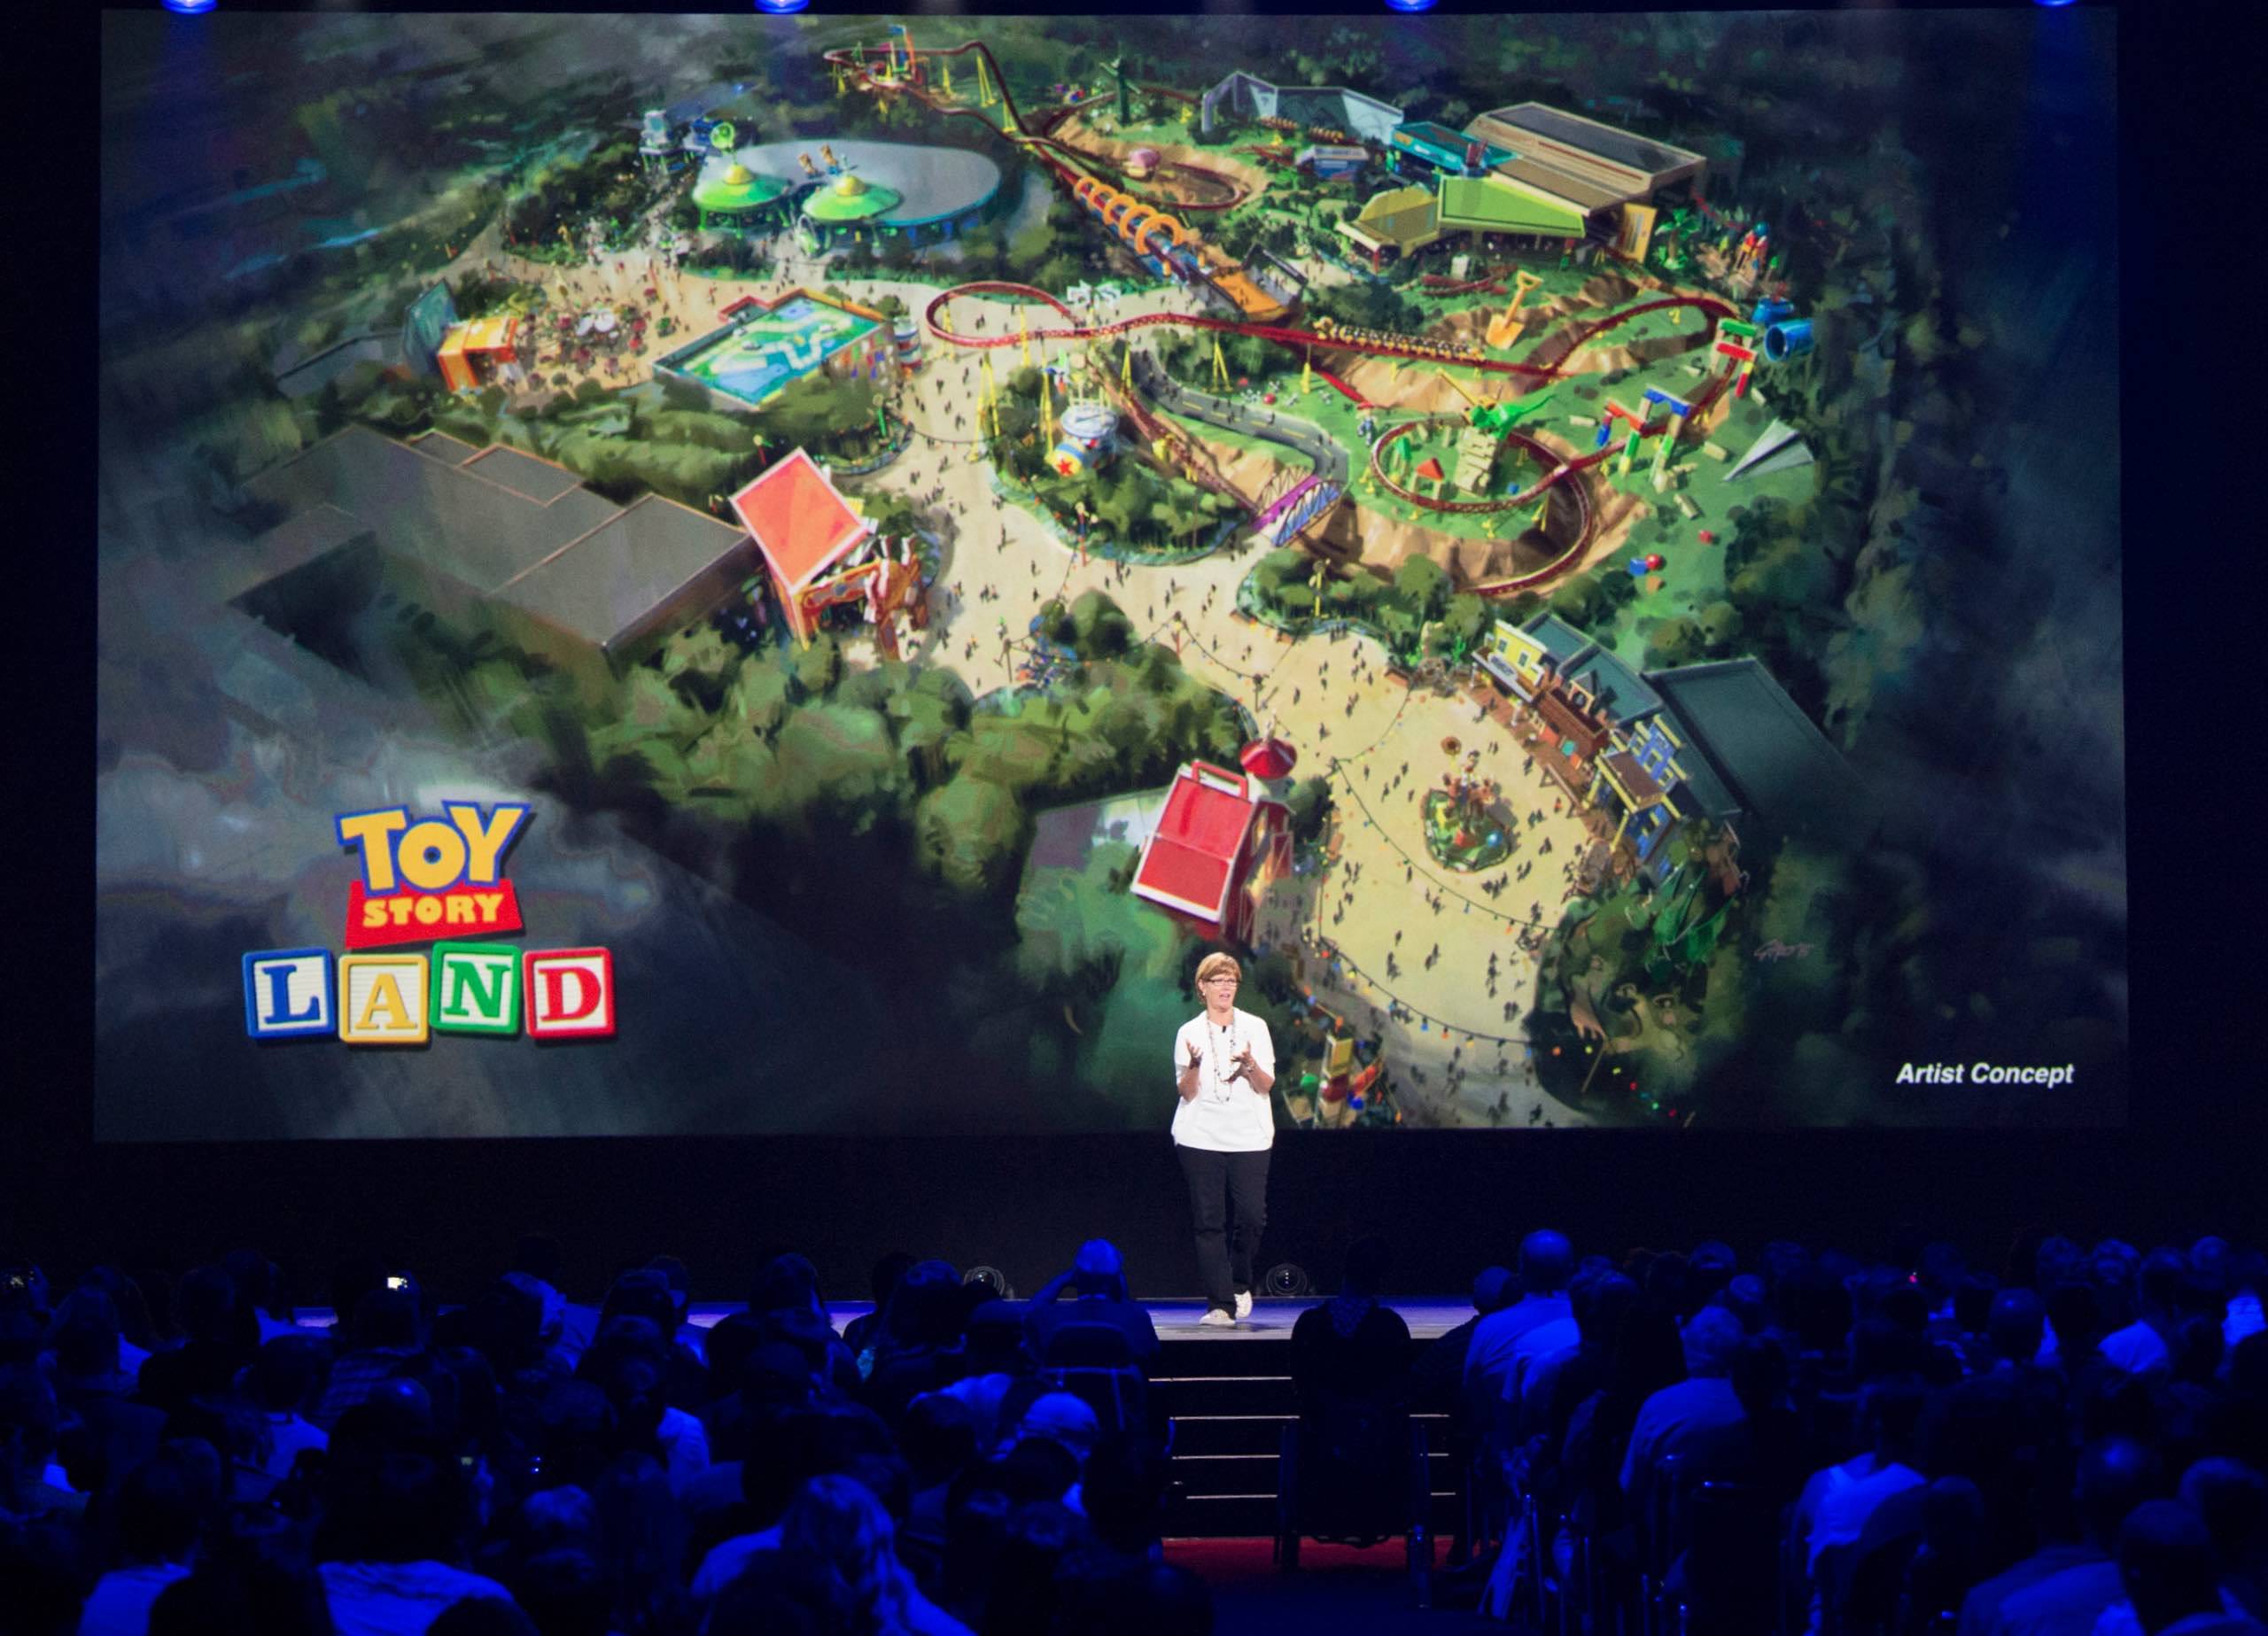 Imagineer Kathy Mangum showing Toy Story Land concept art at D23